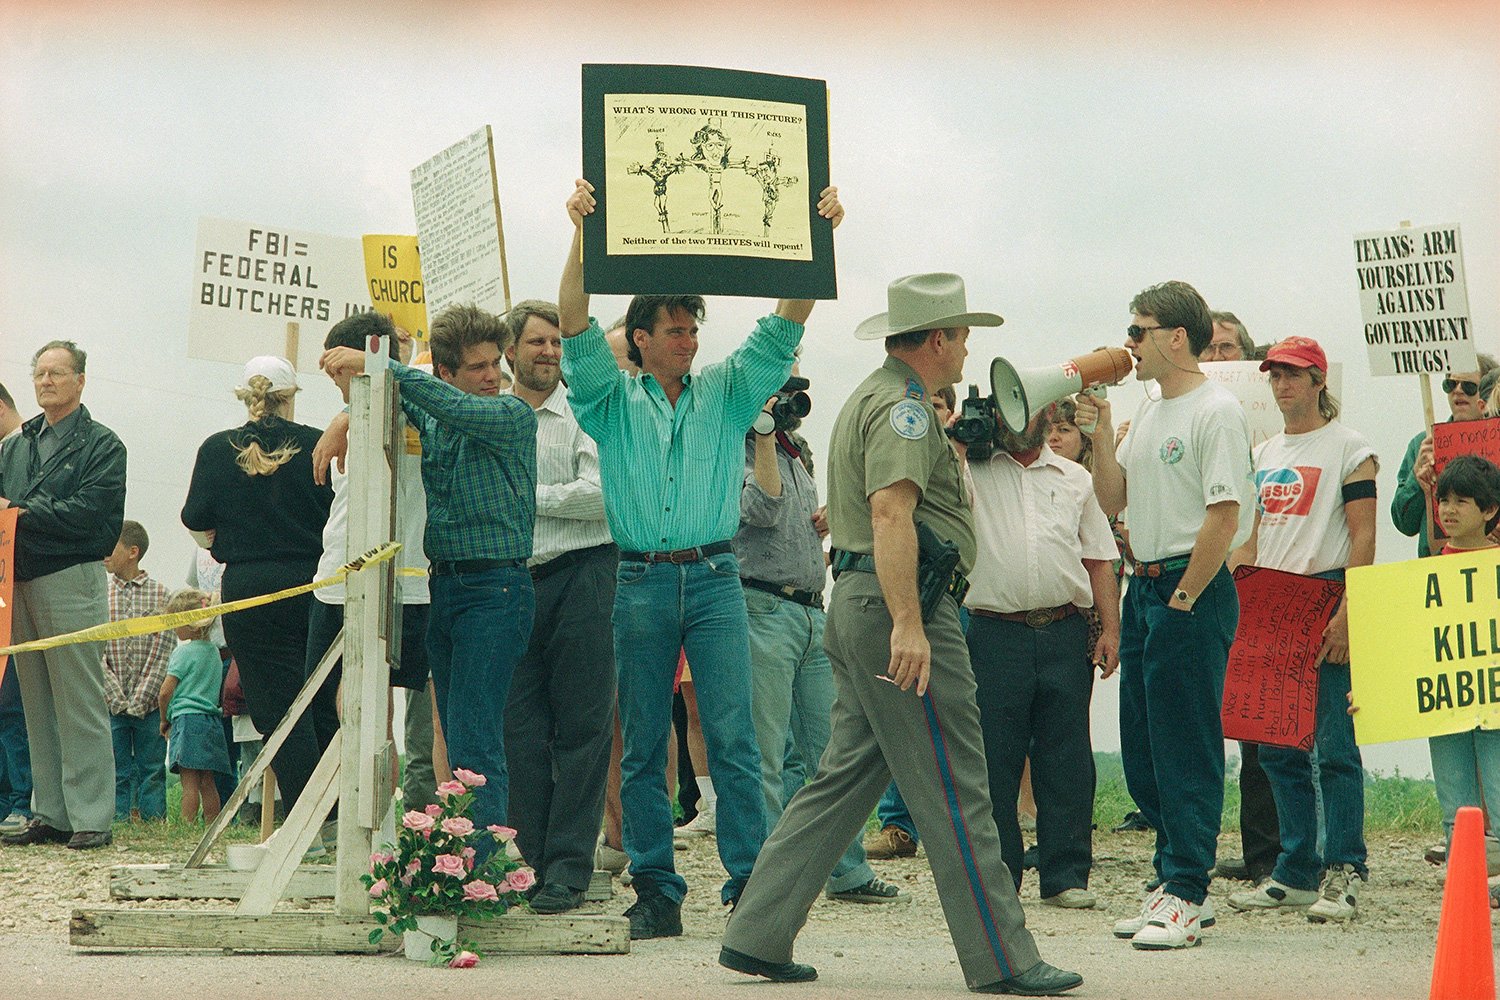  Demonstrators opposed to the FBI and ATF actions at the Branch Davidian compound, gather at a roadblock leading to the site near Waco, Texas, as a public safety officer walks past, April 24, 1993. (AP Photo/Susan Weems) 